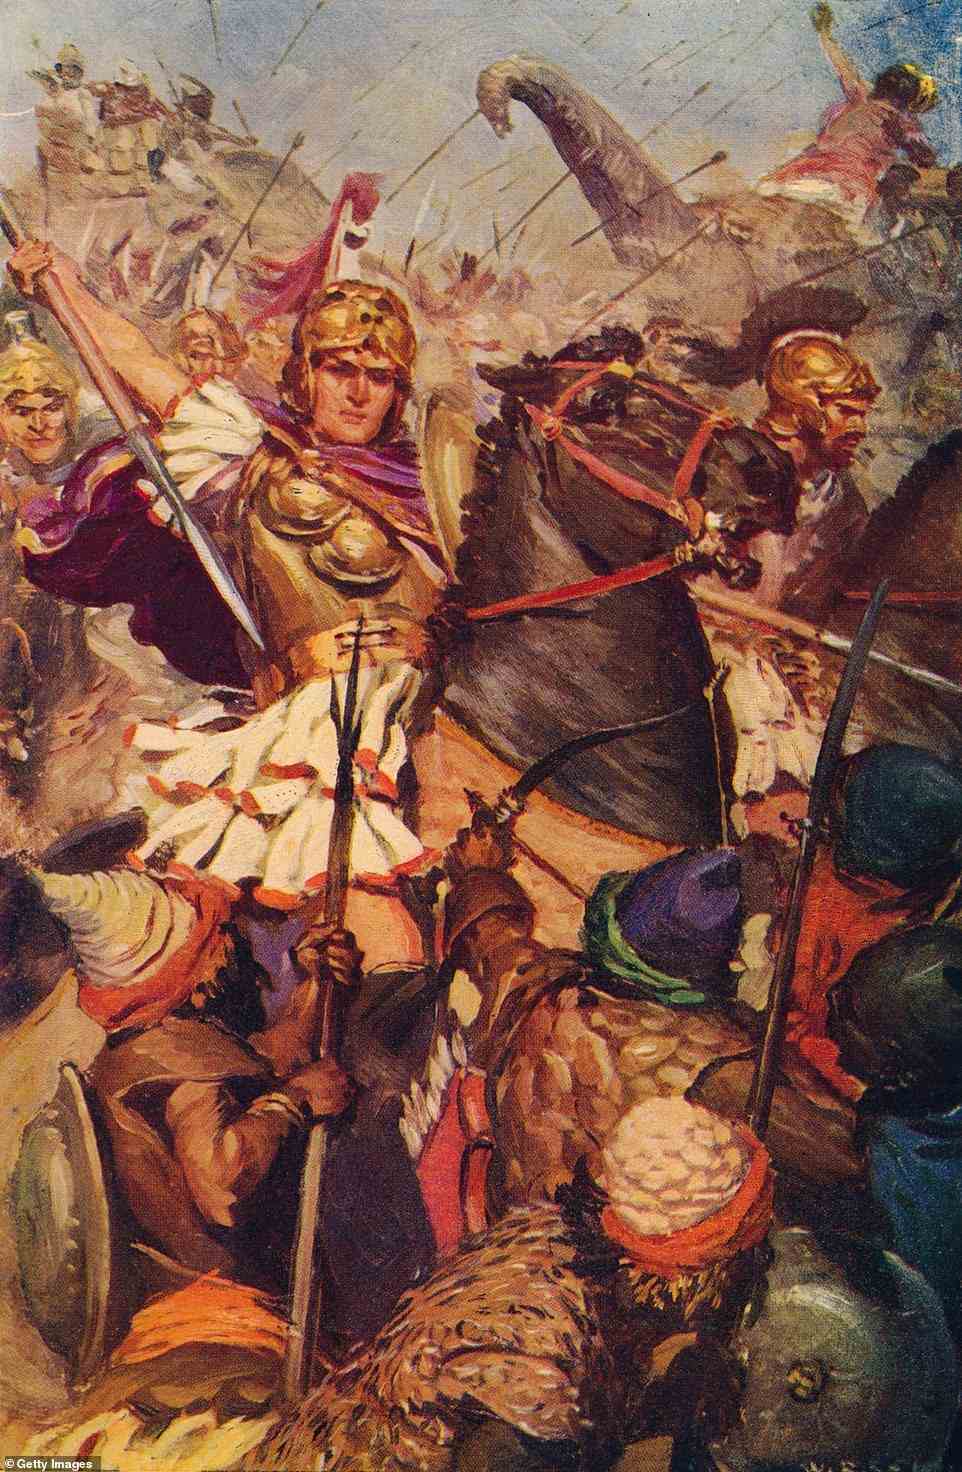 The forces of Alexander the Great (356-323 BC) are depicted fighting those of the Indian rajah Porus (active 327-315 BC) on the banks of the River Hydaspes, (now the River Jhelum in Pakistan)